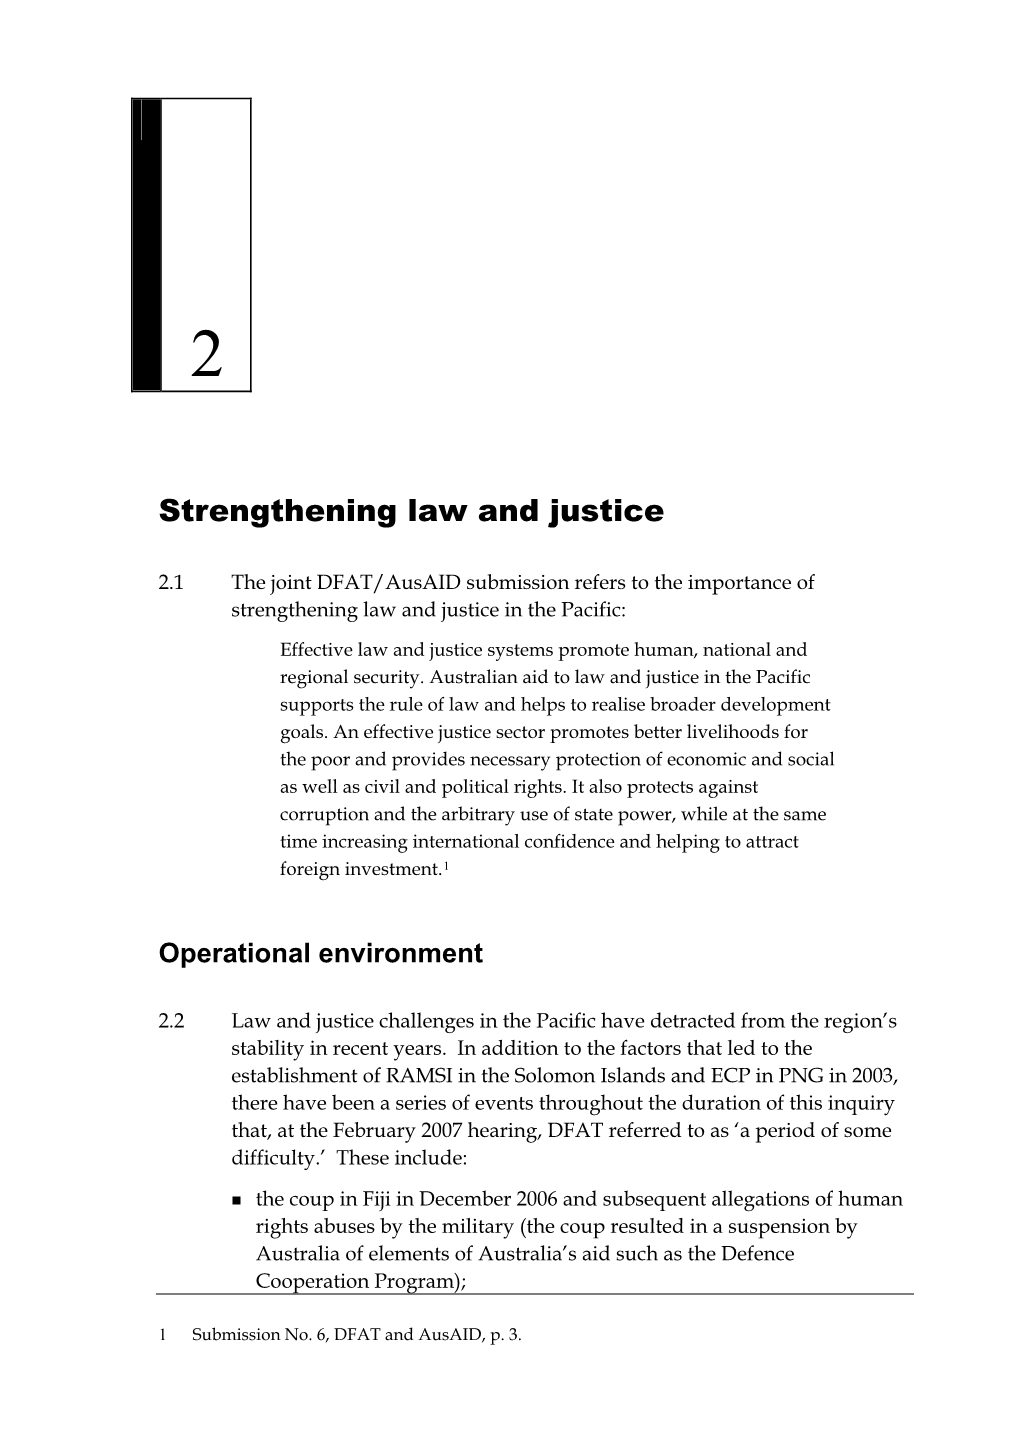 Chapter 2: Strengthening Law and Justice